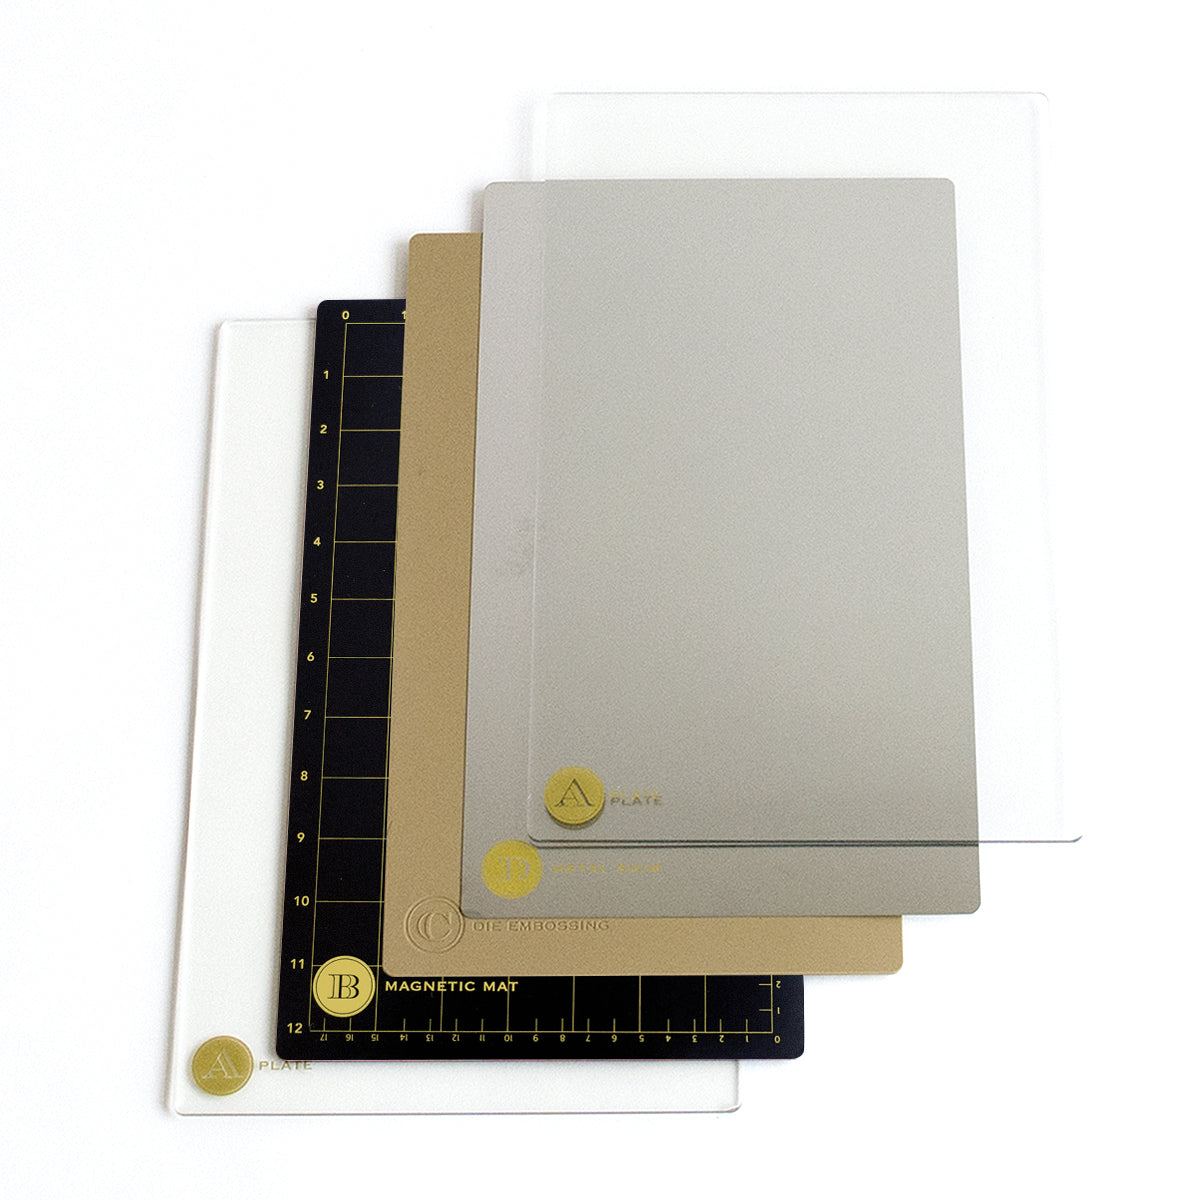 A stack of Empress Large Full Plate Set including a magnetic mat, an embossing mat, and clear plastic sheets on a white background.